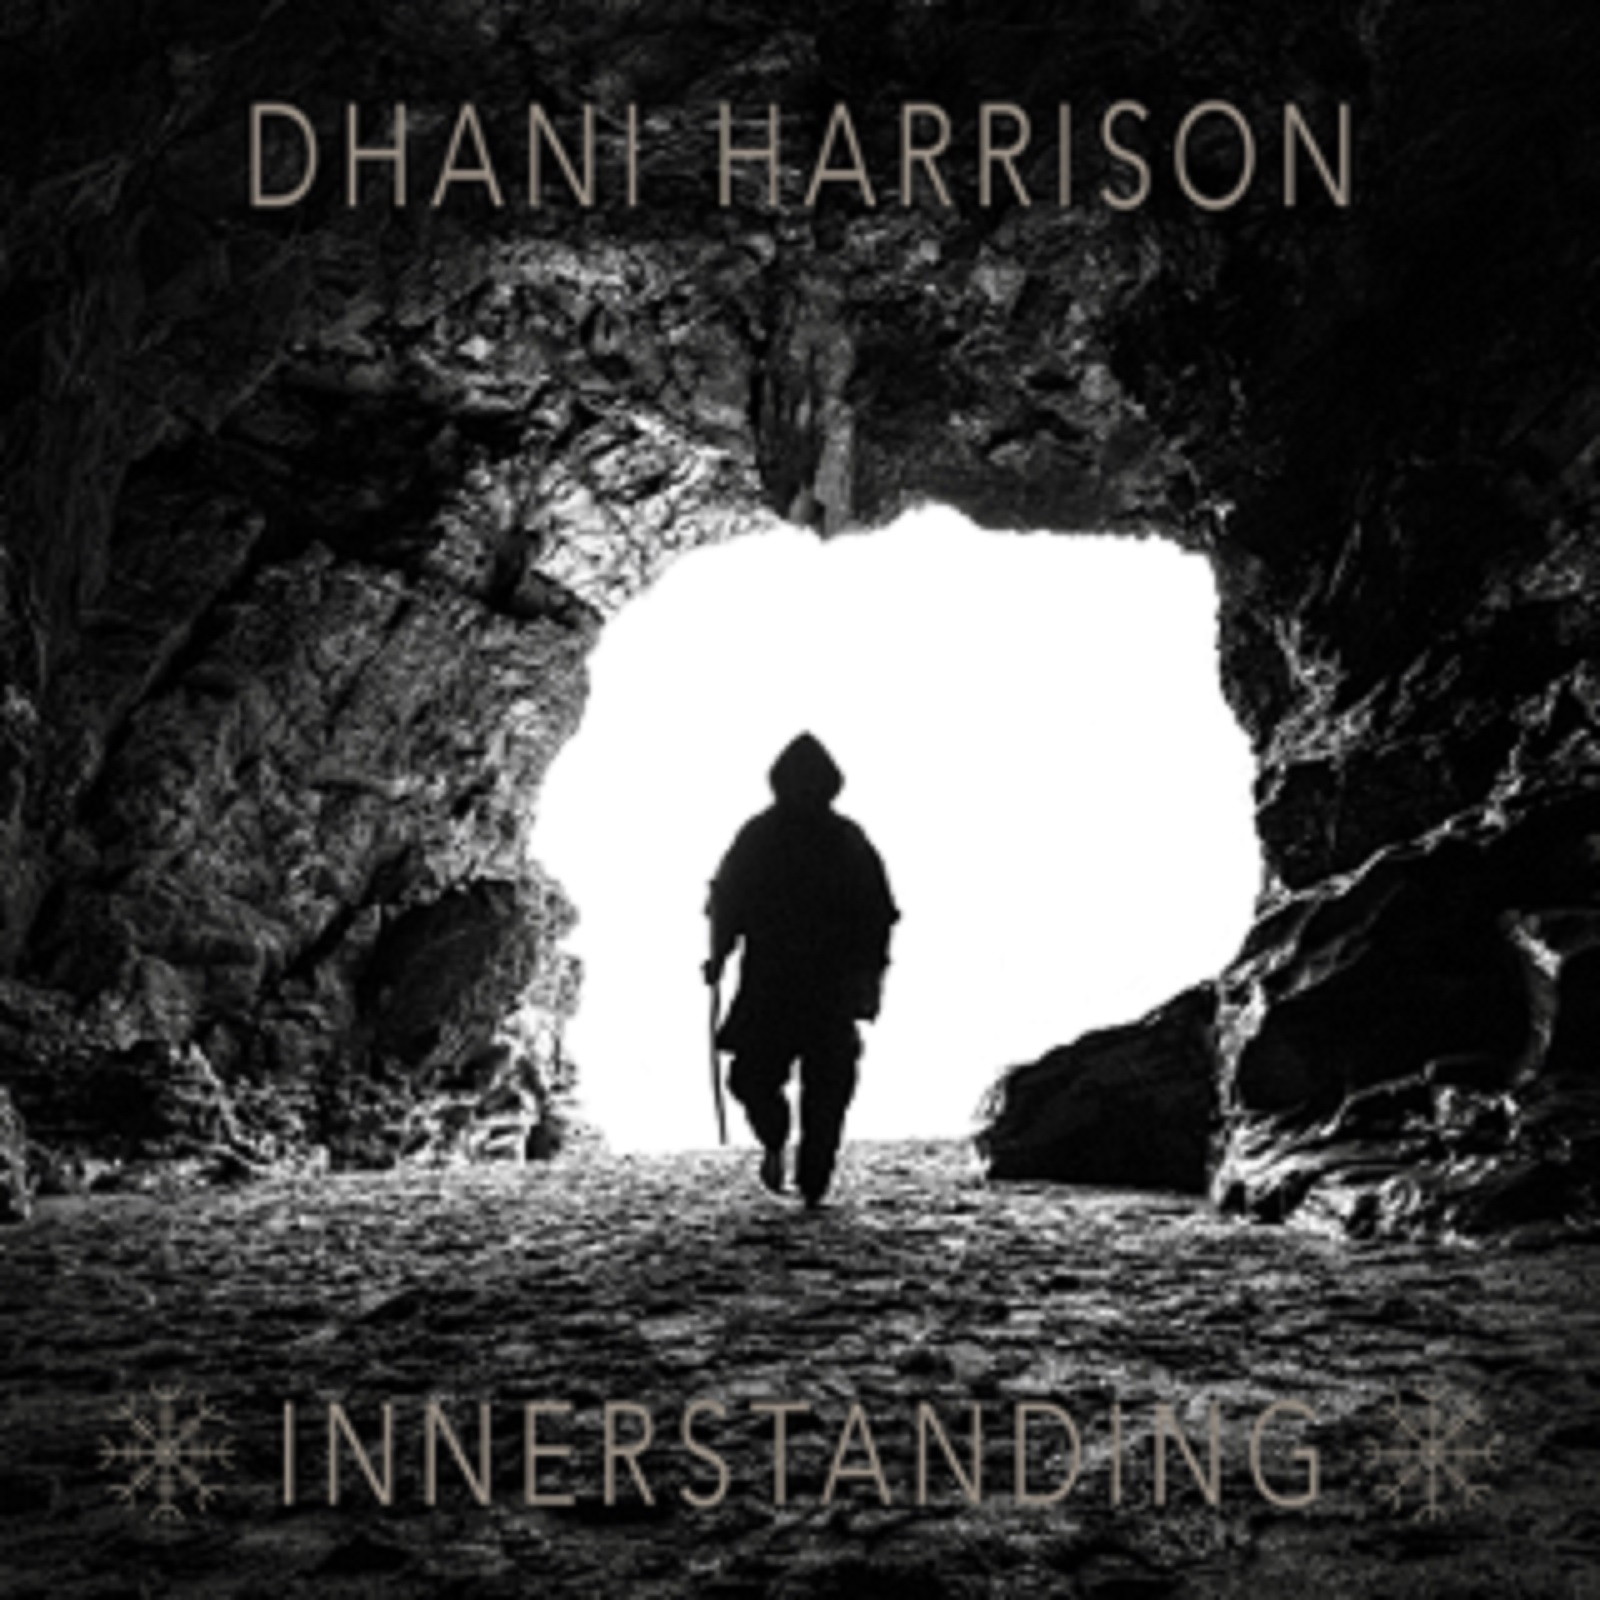 Dhani Harrison Announces First Album In Six Years – 'INNERSTANDING' To Be Released Digitally On October 20